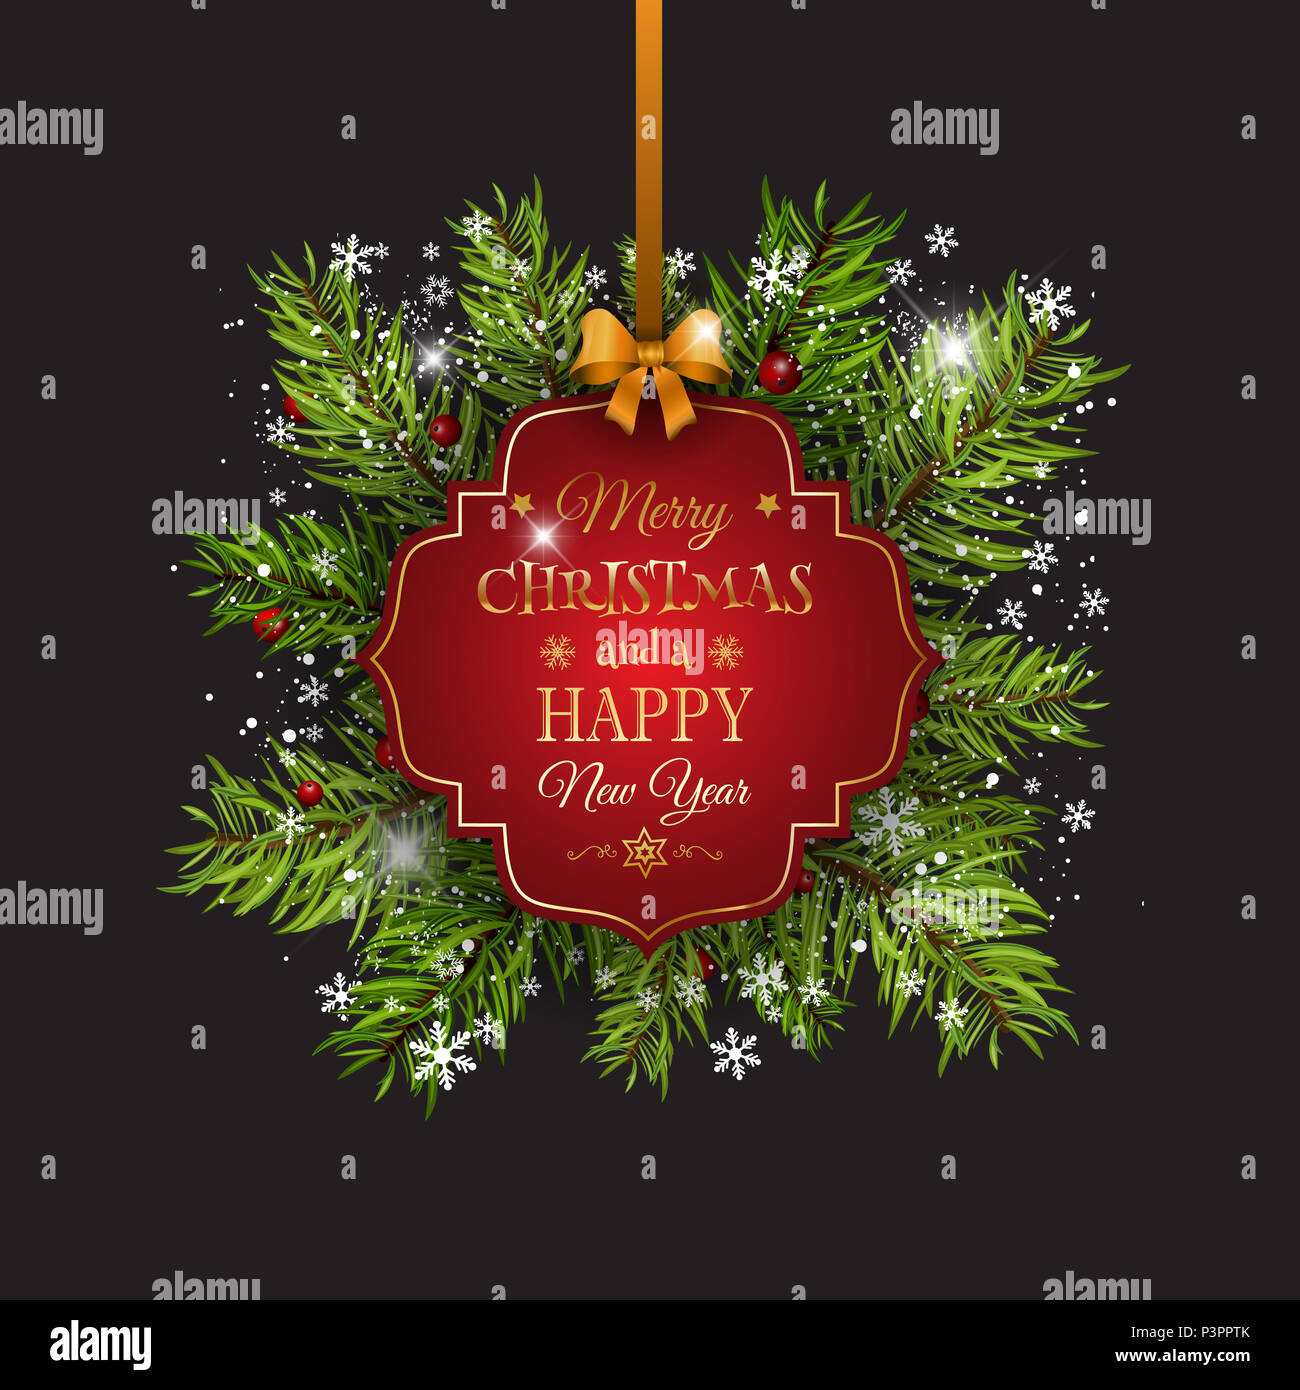 Christmas background with fir tree branches, ribbon and decorative label Stock Photo